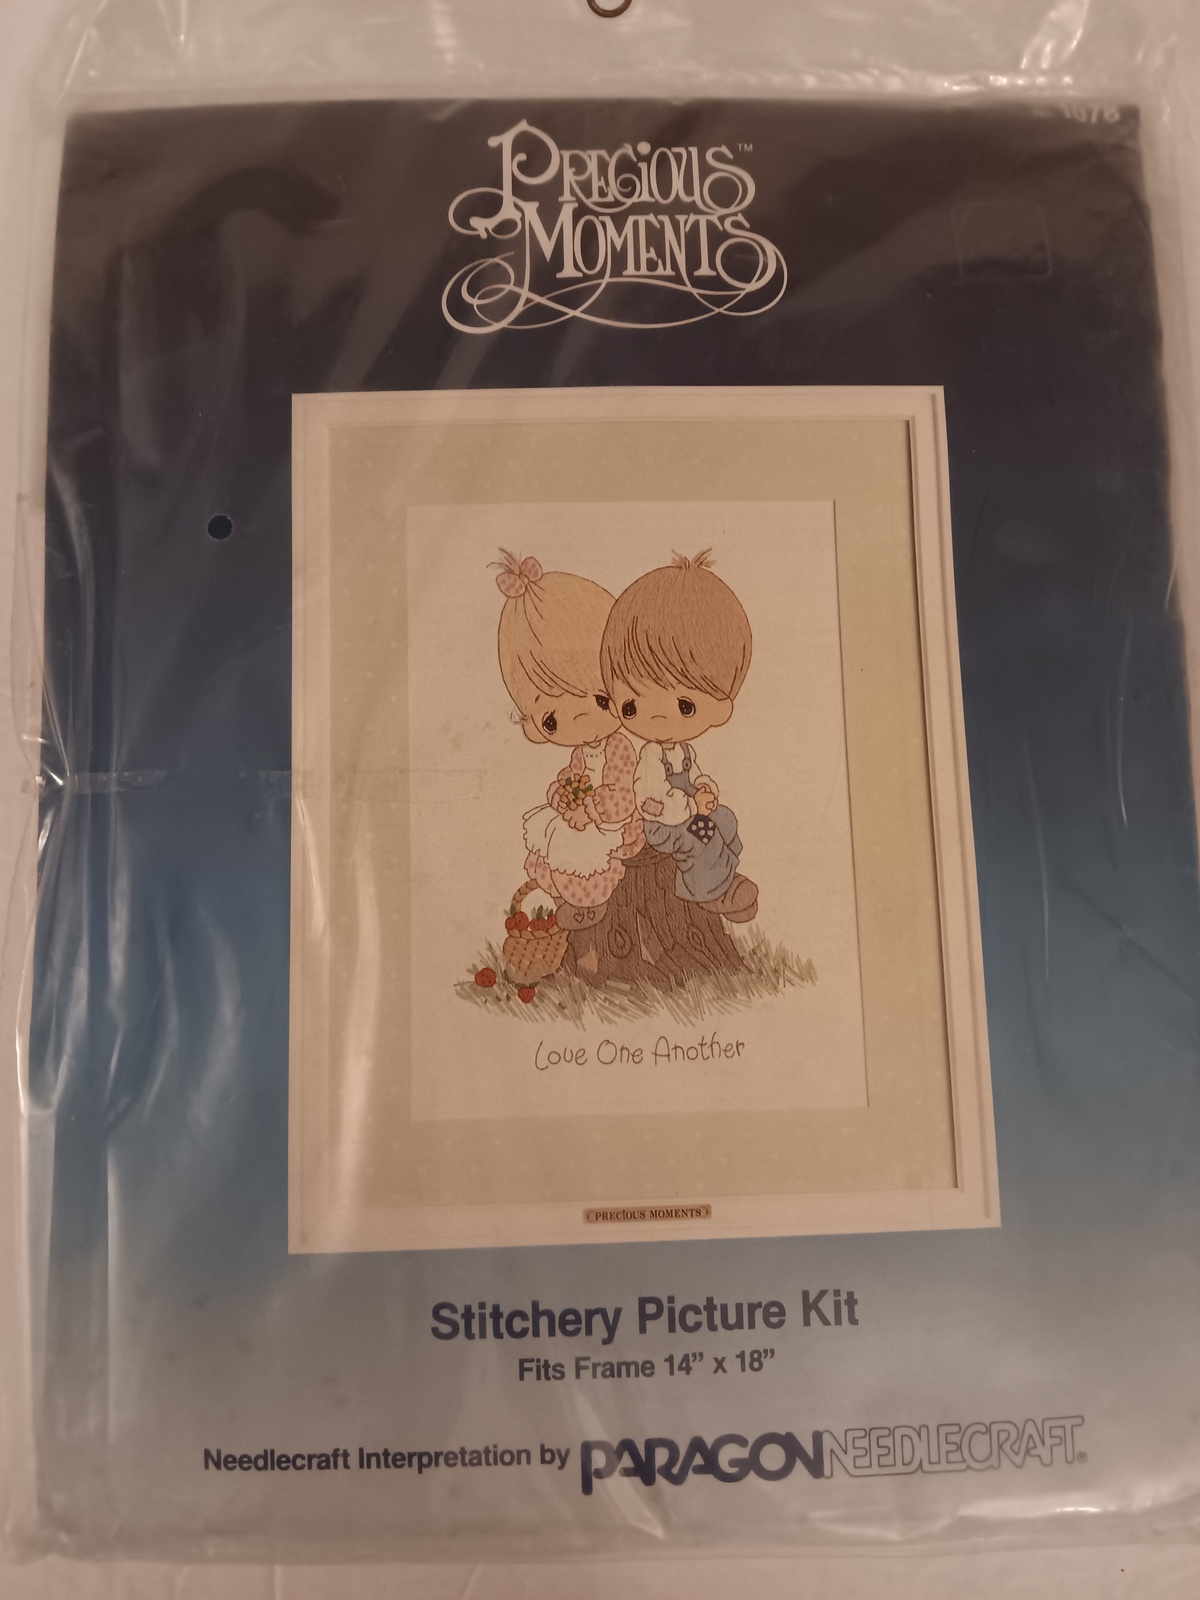 Precious Moments Love One Another 1078 Stitchery Picture Kit Paragon Needlecraft - $29.99